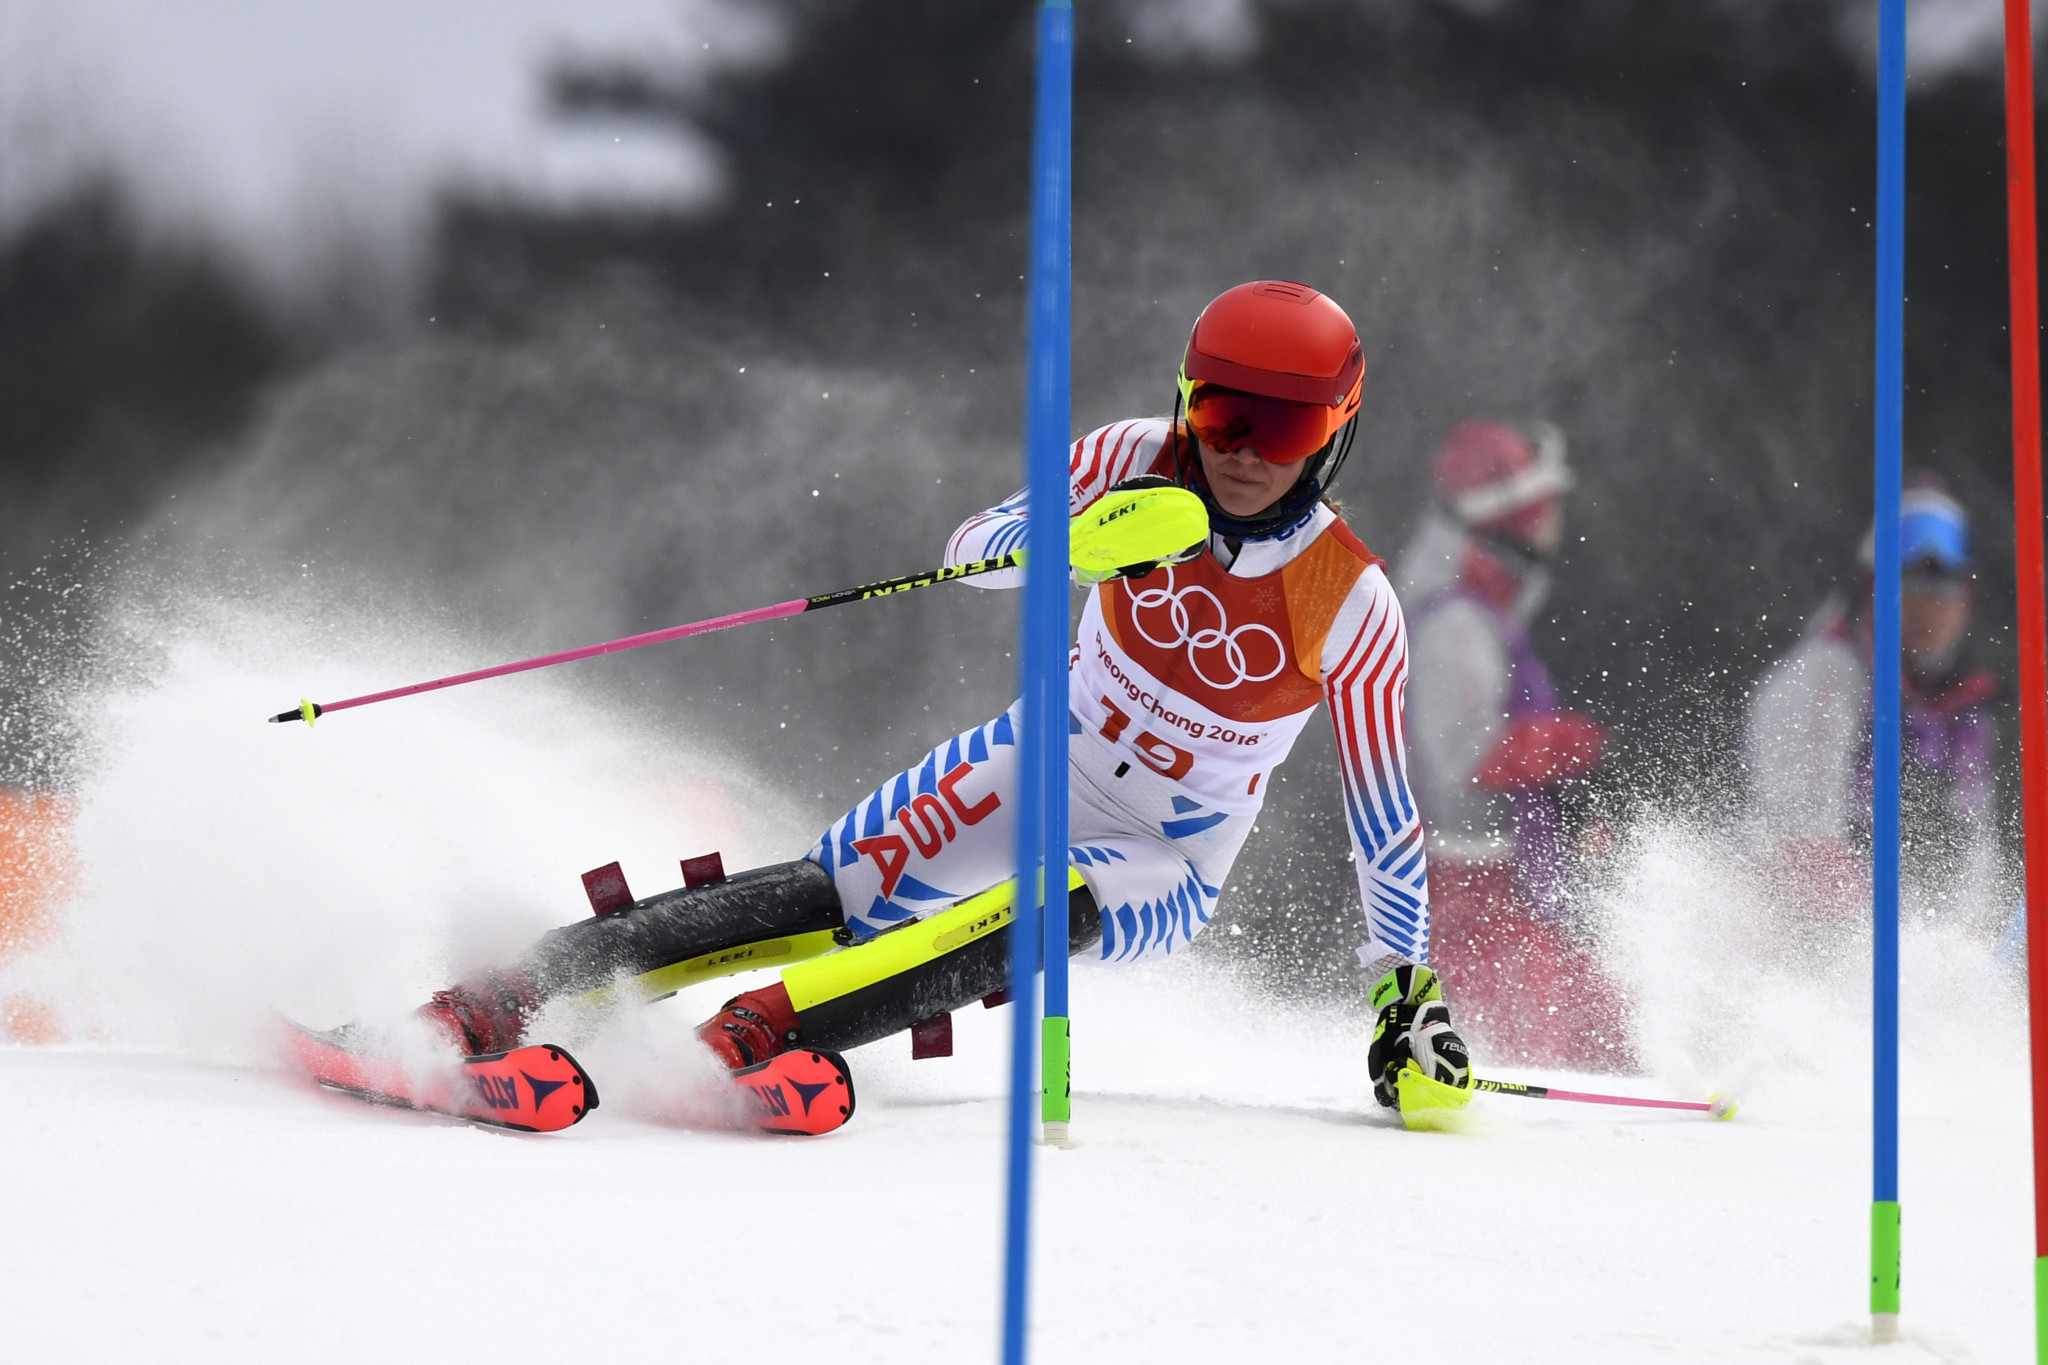 The US has won 17 Alpine skiing gold medals at the Winter Olympics, including Mikaela Shiffrin's women's giant slalom win at Pyeongchang 2018 ©Getty Images